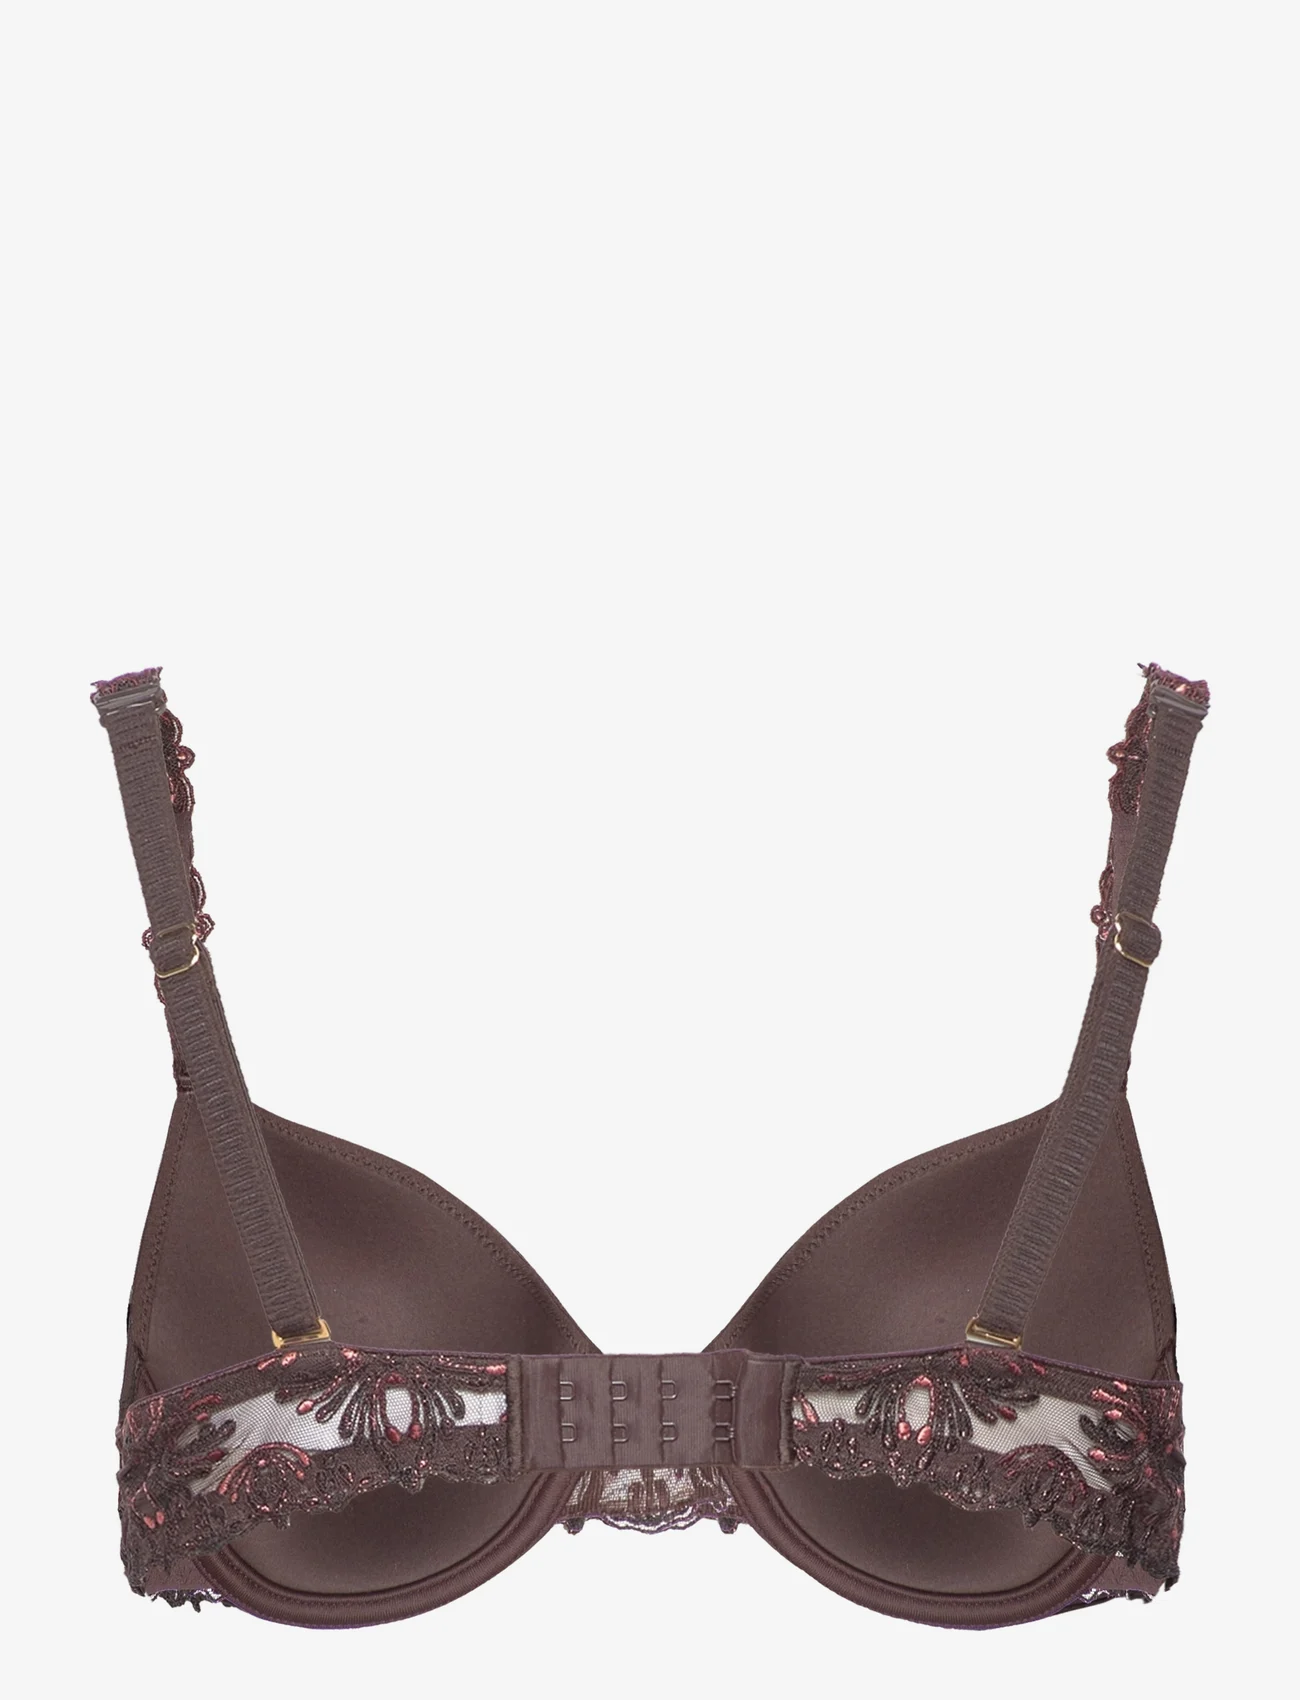 CHANTELLE - Champs Elysees Covering Memory Bra - t-shirt bras - glossy brown - 1